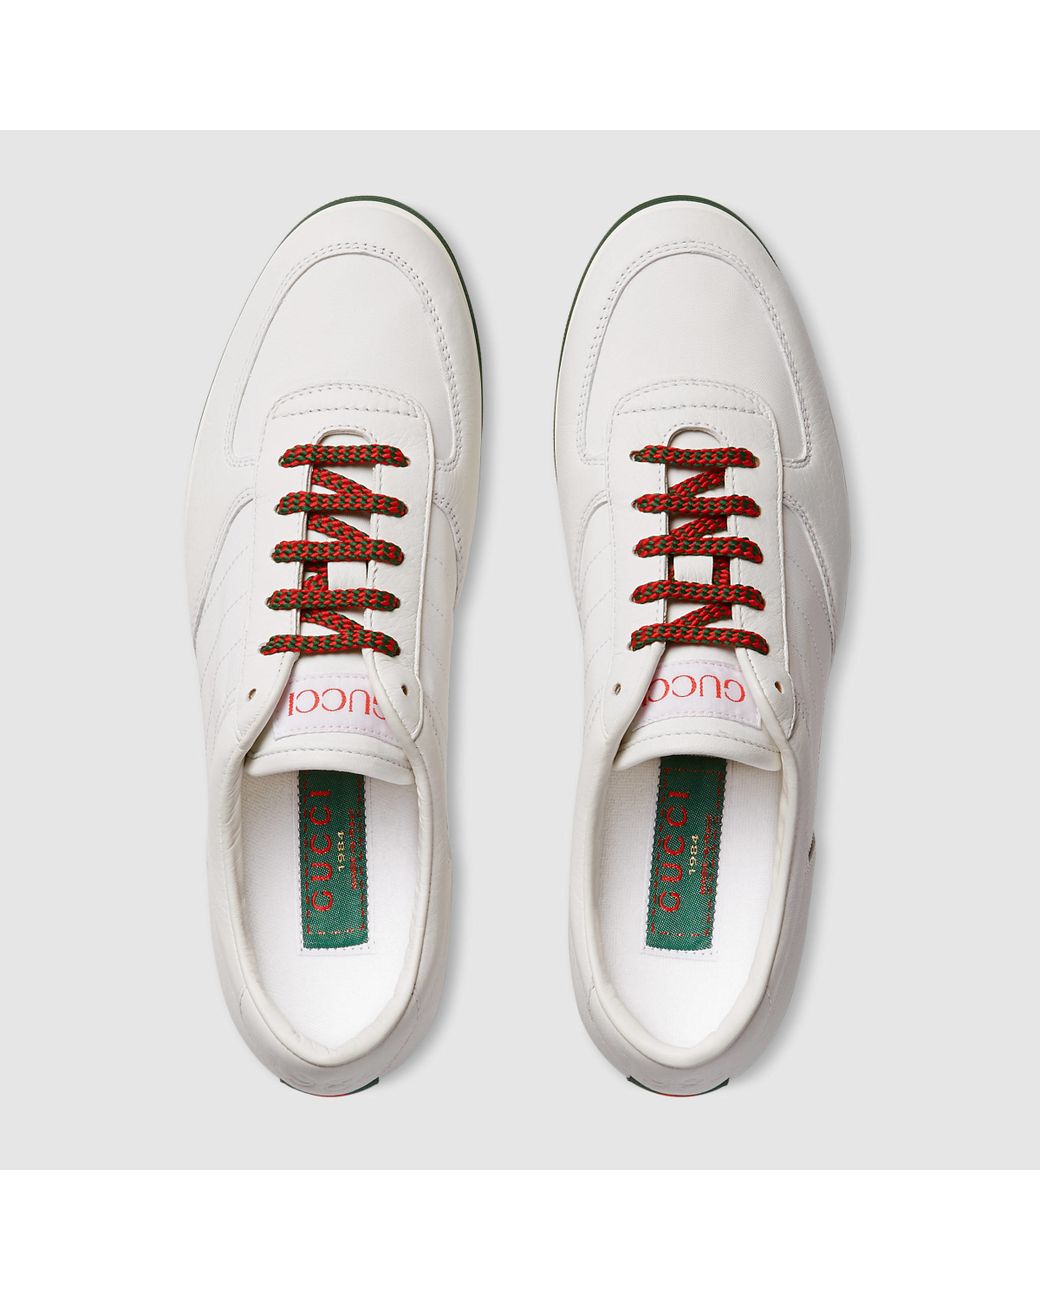 Gucci 1984 Low Top Sneaker In Leather in White | Lyst